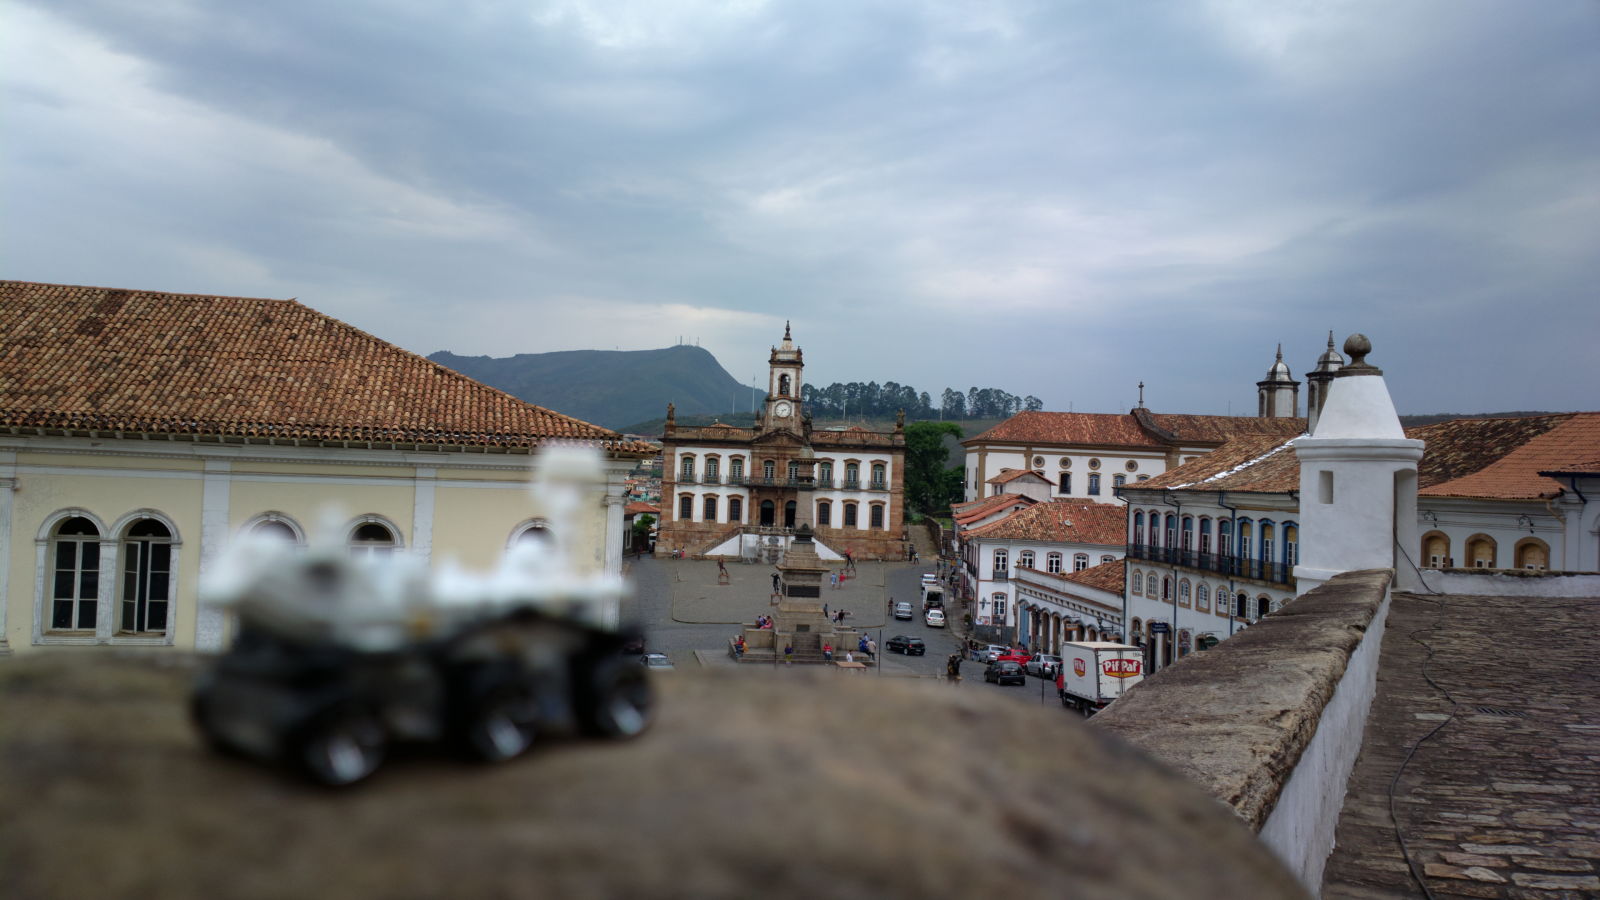 Illustration for article titled Roving Rover - Up and down the hills of Ouro Preto